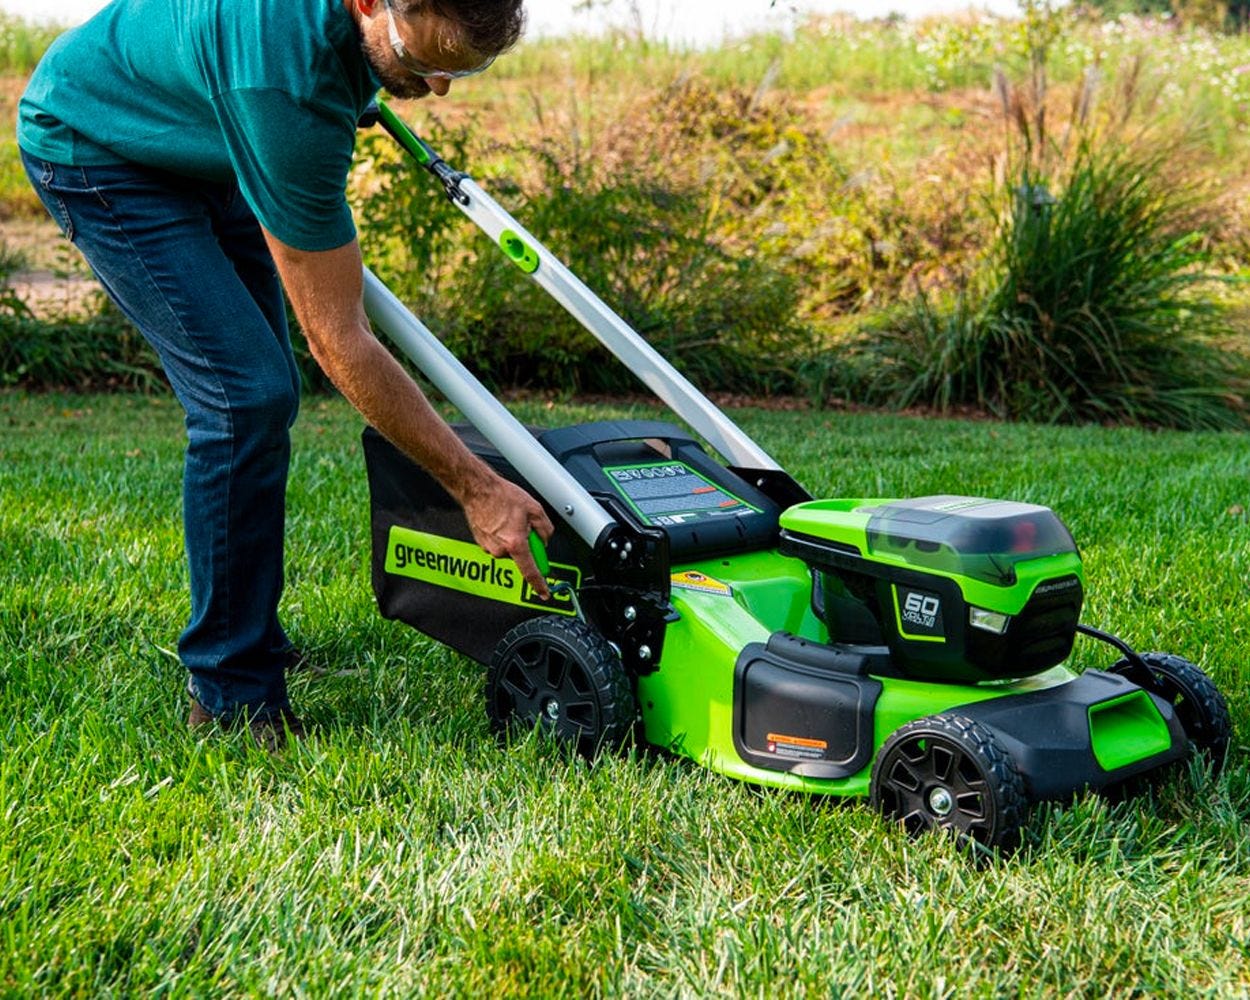 Greenworks Pro 130 MPH 610 CFM 60V Battery Cordless Handheld Leaf Blower with 2.5 Ah Battery and Charger